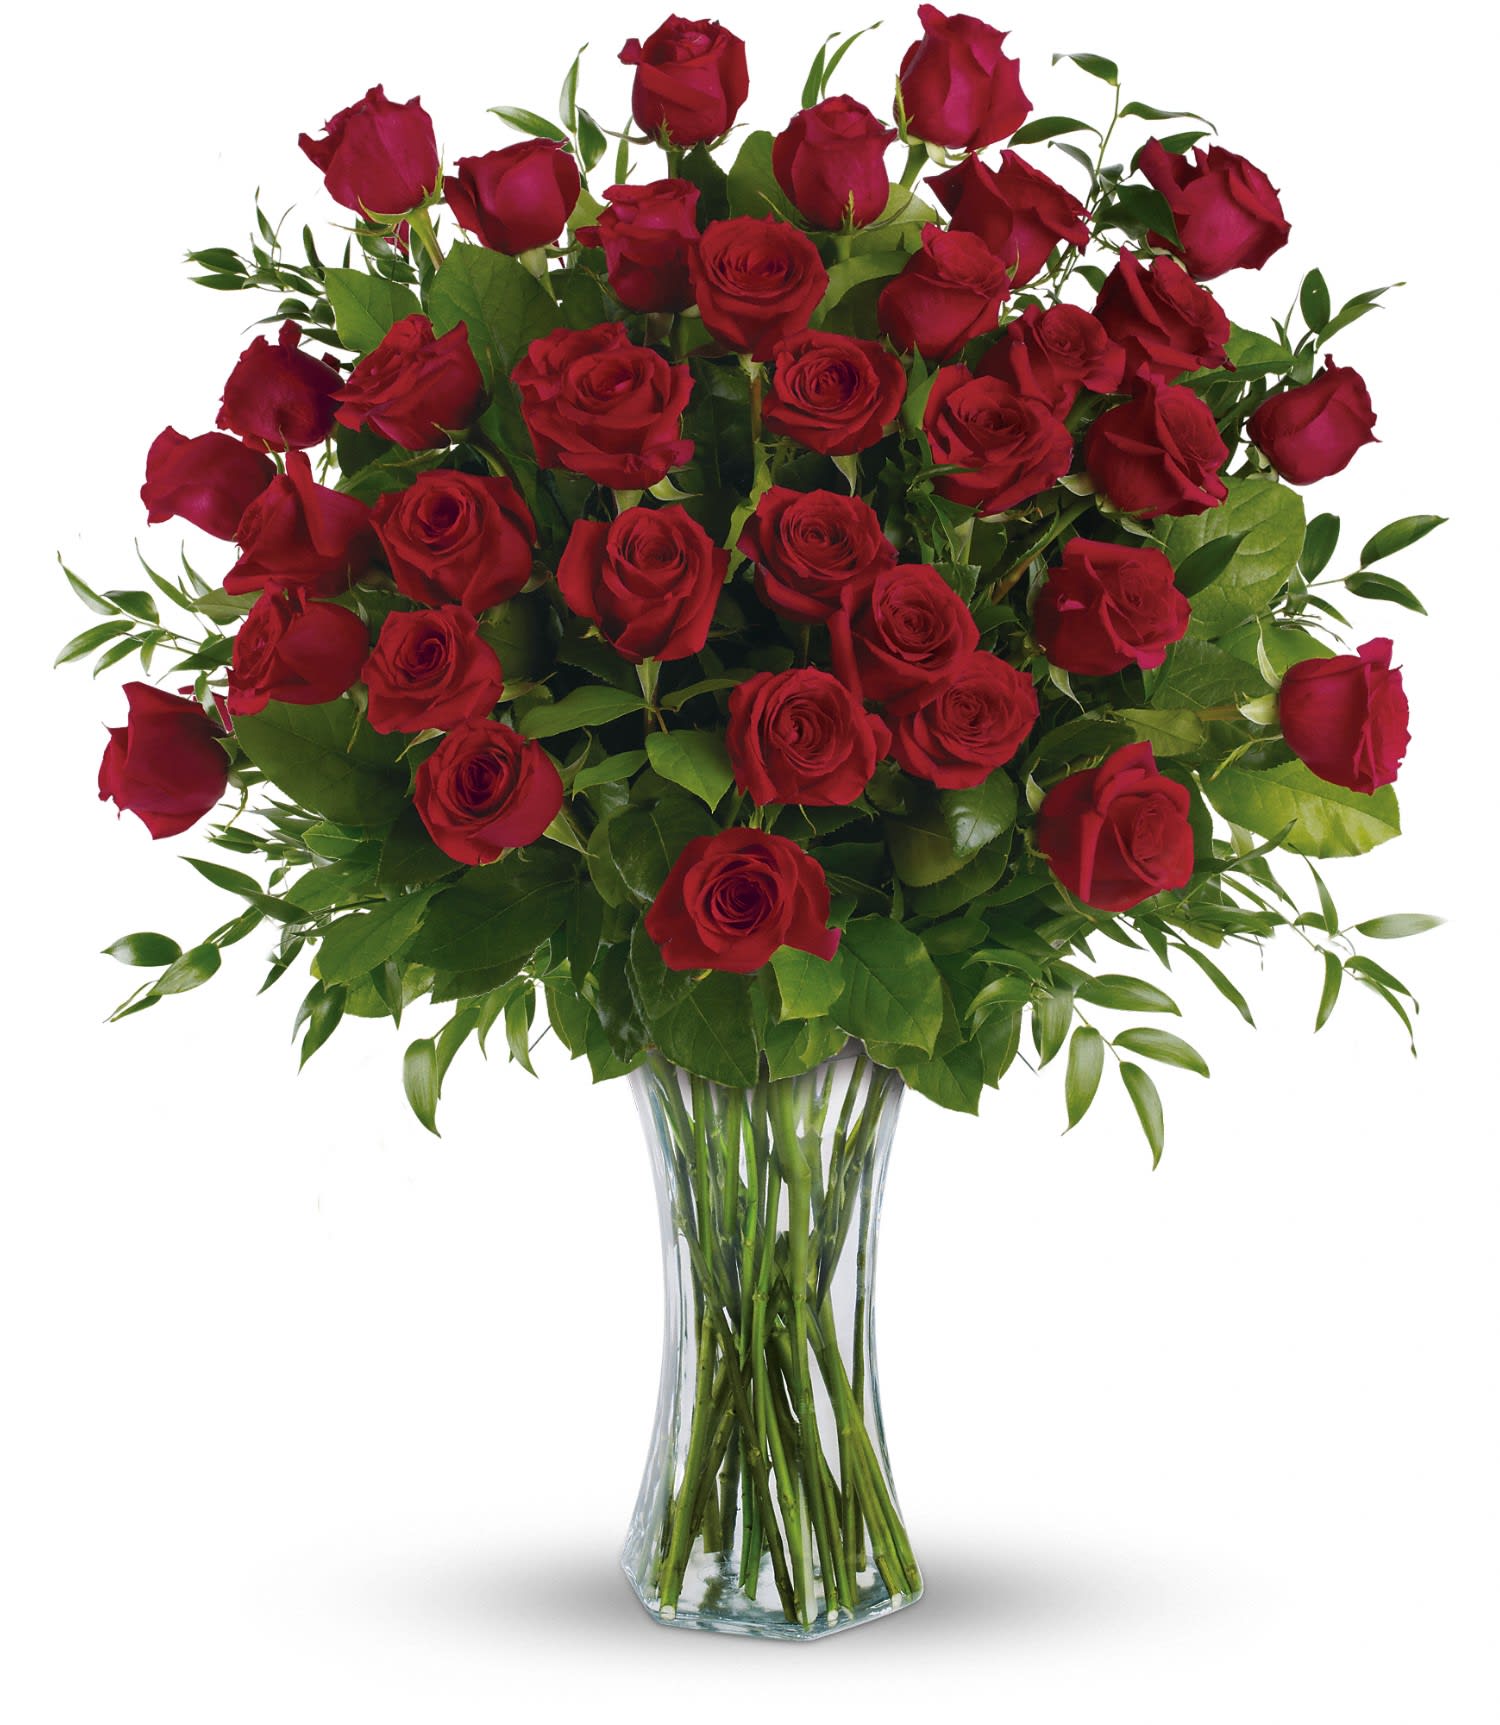 Breathtaking Beauty - 3 Dozen Long Stemmed Roses - One, two, three! Three dozen spectacularly gorgeous red roses delivered in a dazzling flared glass vase - positive proof that love is a many-splendored thing. Imagine her loving this amazing bouquet day after day. Hero-worshipping time. 